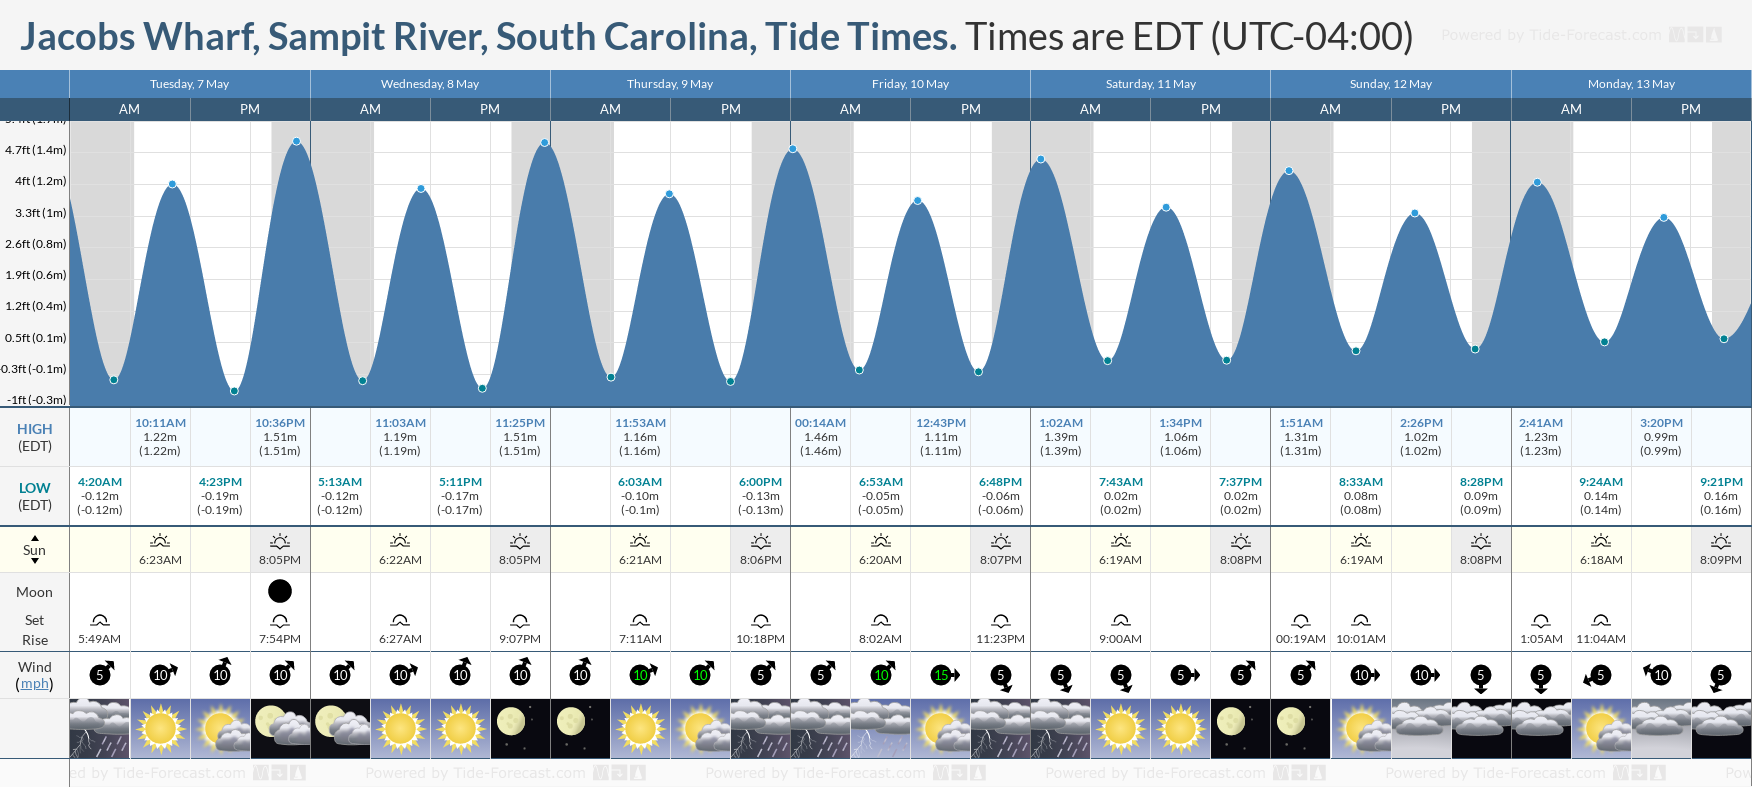 Jacobs Wharf, Sampit River, South Carolina Tide Chart including high and low tide tide times for the next 7 days